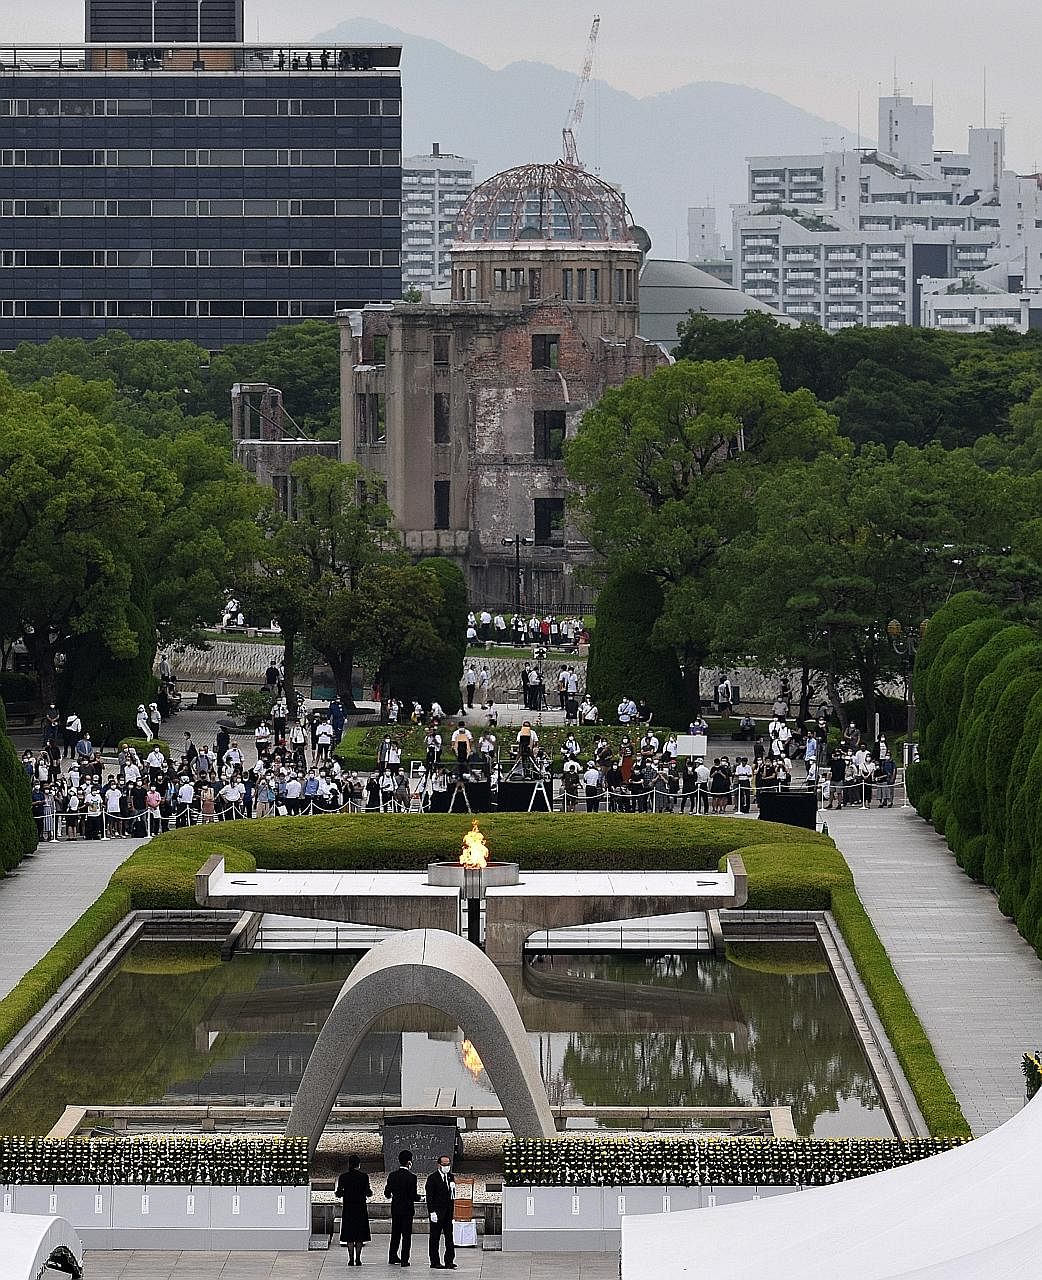 Though thousands usually pack Hiroshima's Peace Park on Aug 6 to pray and offer paper cranes as a symbol of peace, entry this year was limited and only survivors and their families could attend the memorial. PHOTOS: EPA-EFE An elderly woman (above) o